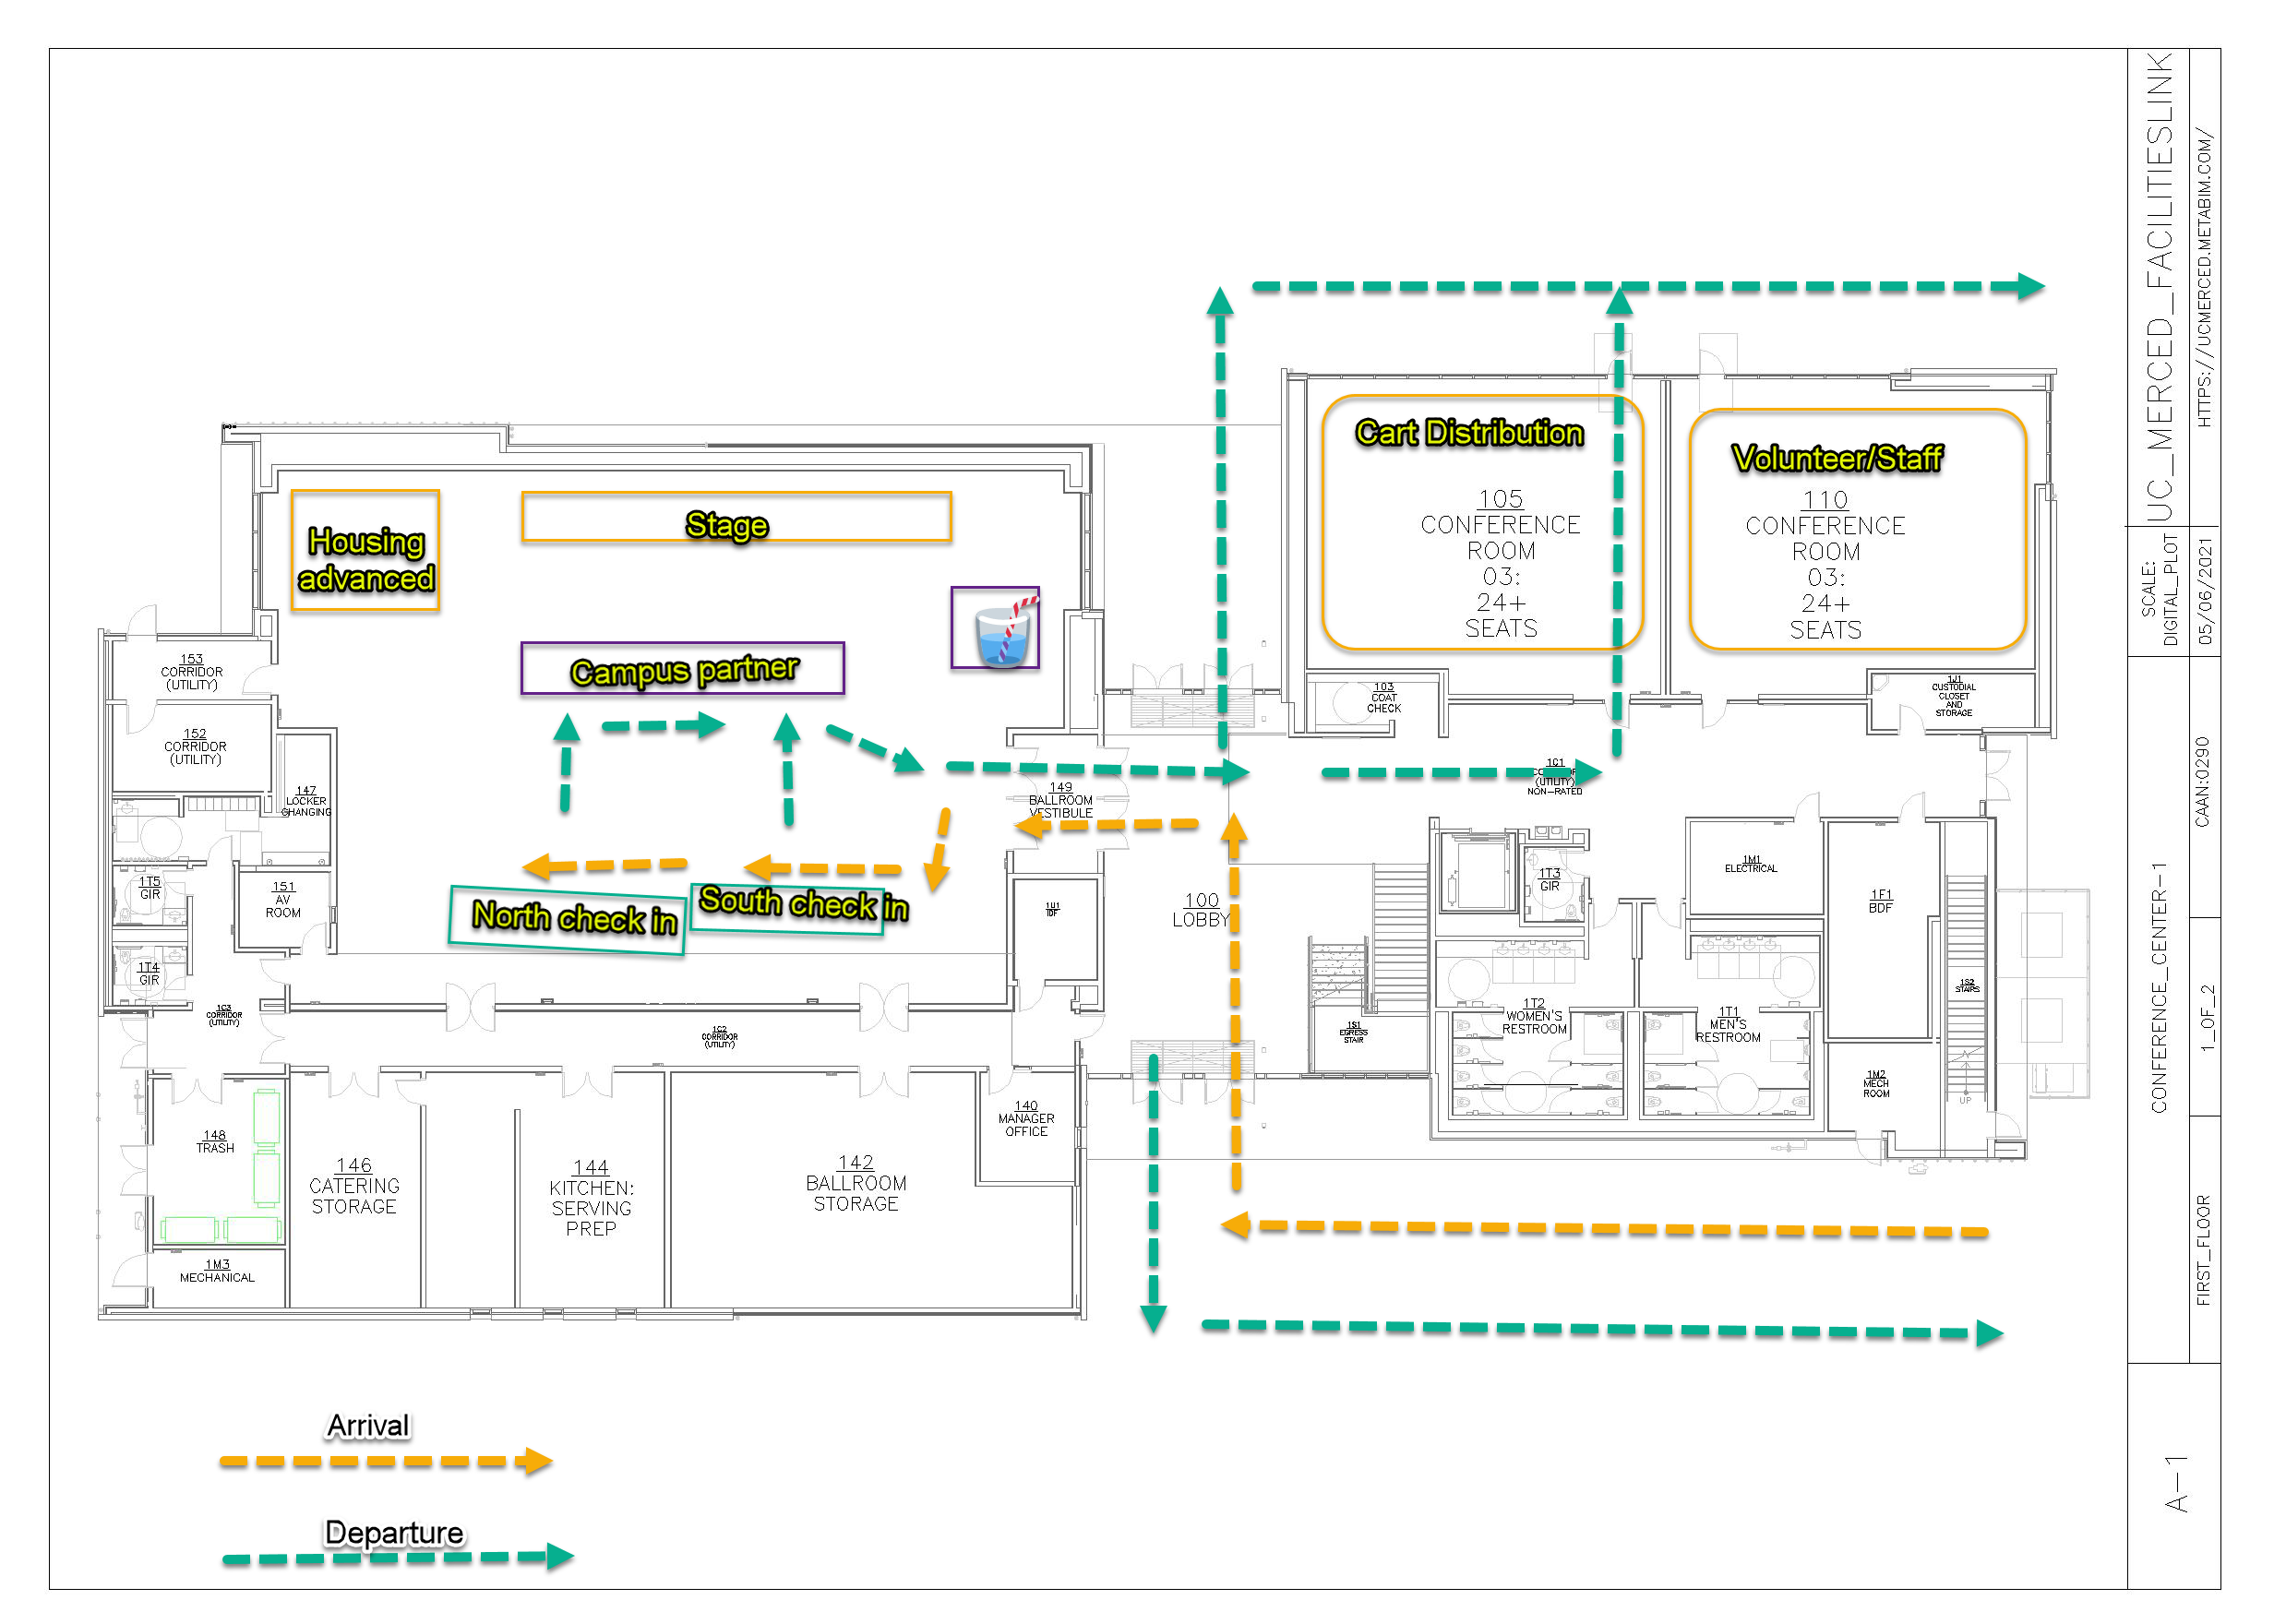 Conference Center move in map